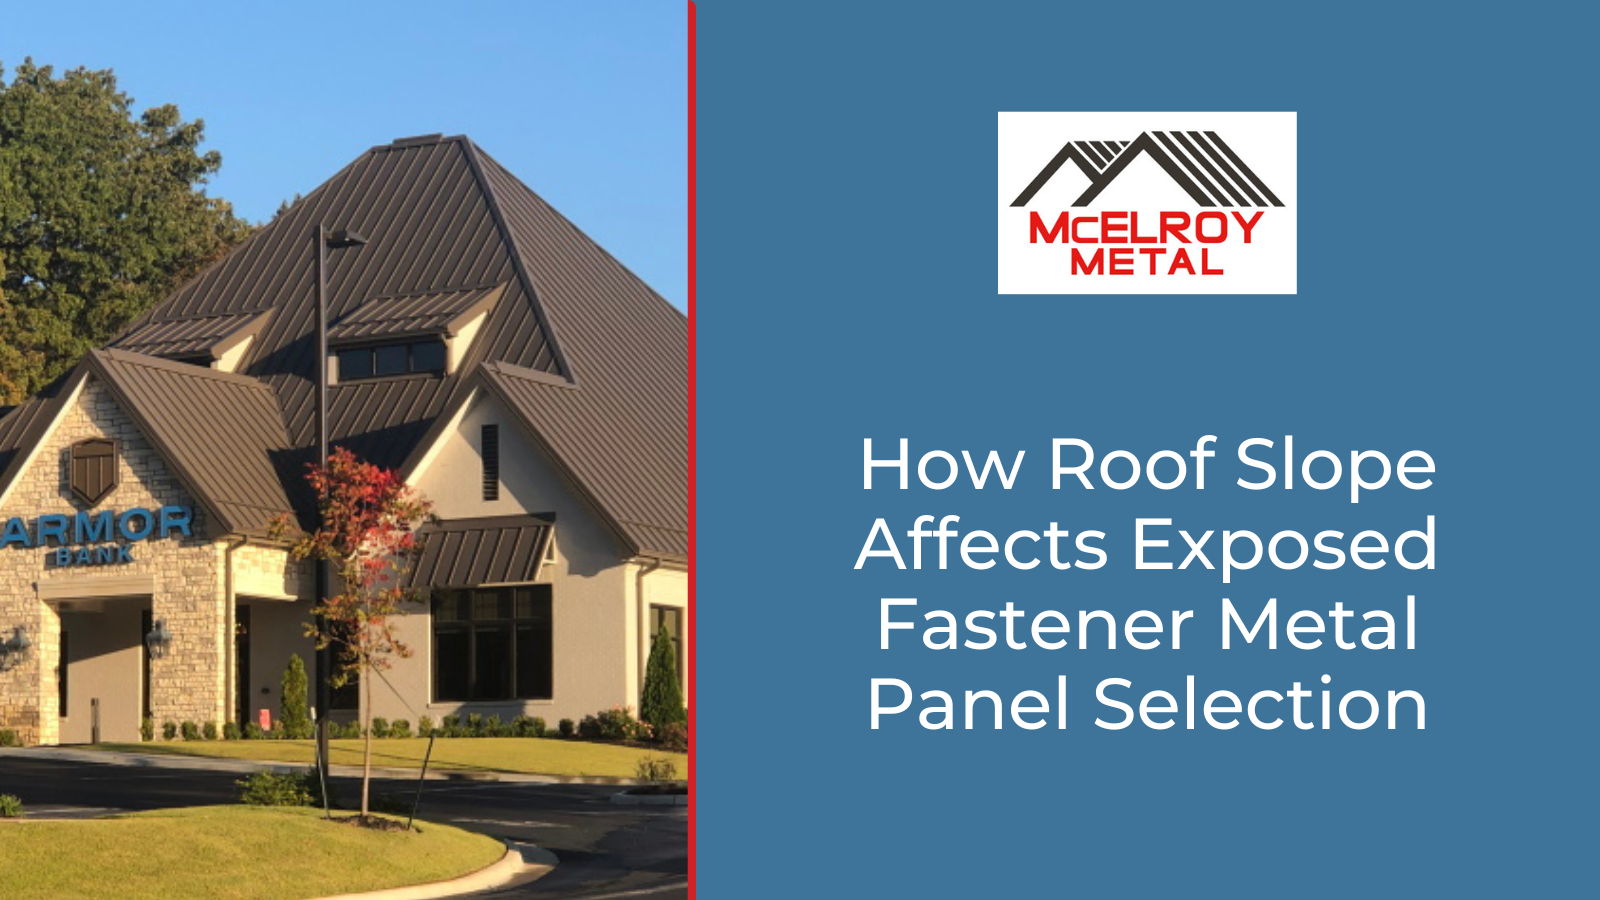 How Roof Slope Affects Exposed Fastener Metal Panel Selection